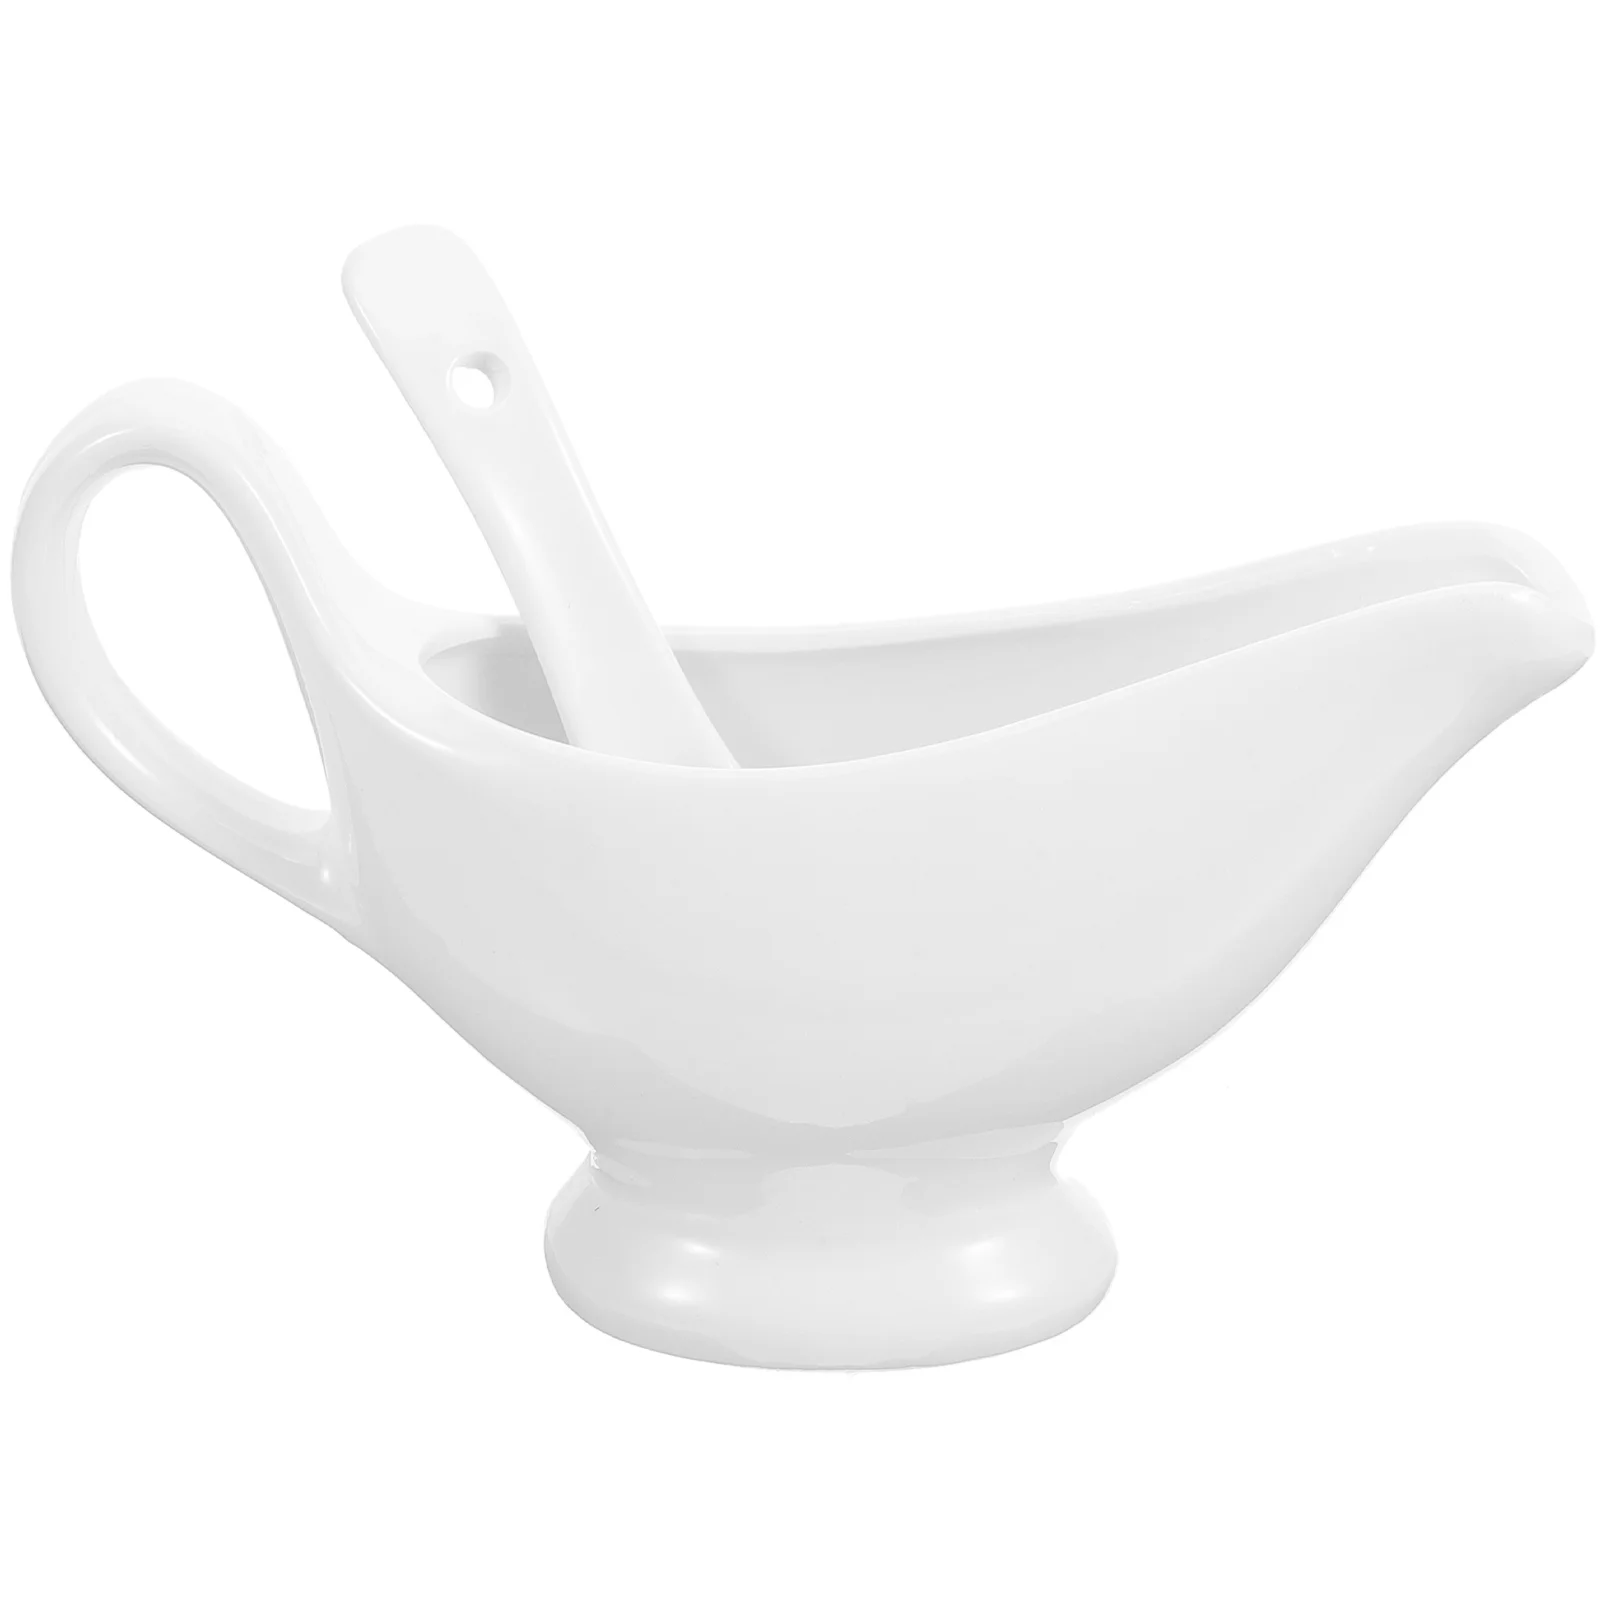 

Water Jug Gravy Boat Dinnerware Pitcher Sauce Container Porcelain Jar Ceramic Cup White Small Milk Boats Dispenser